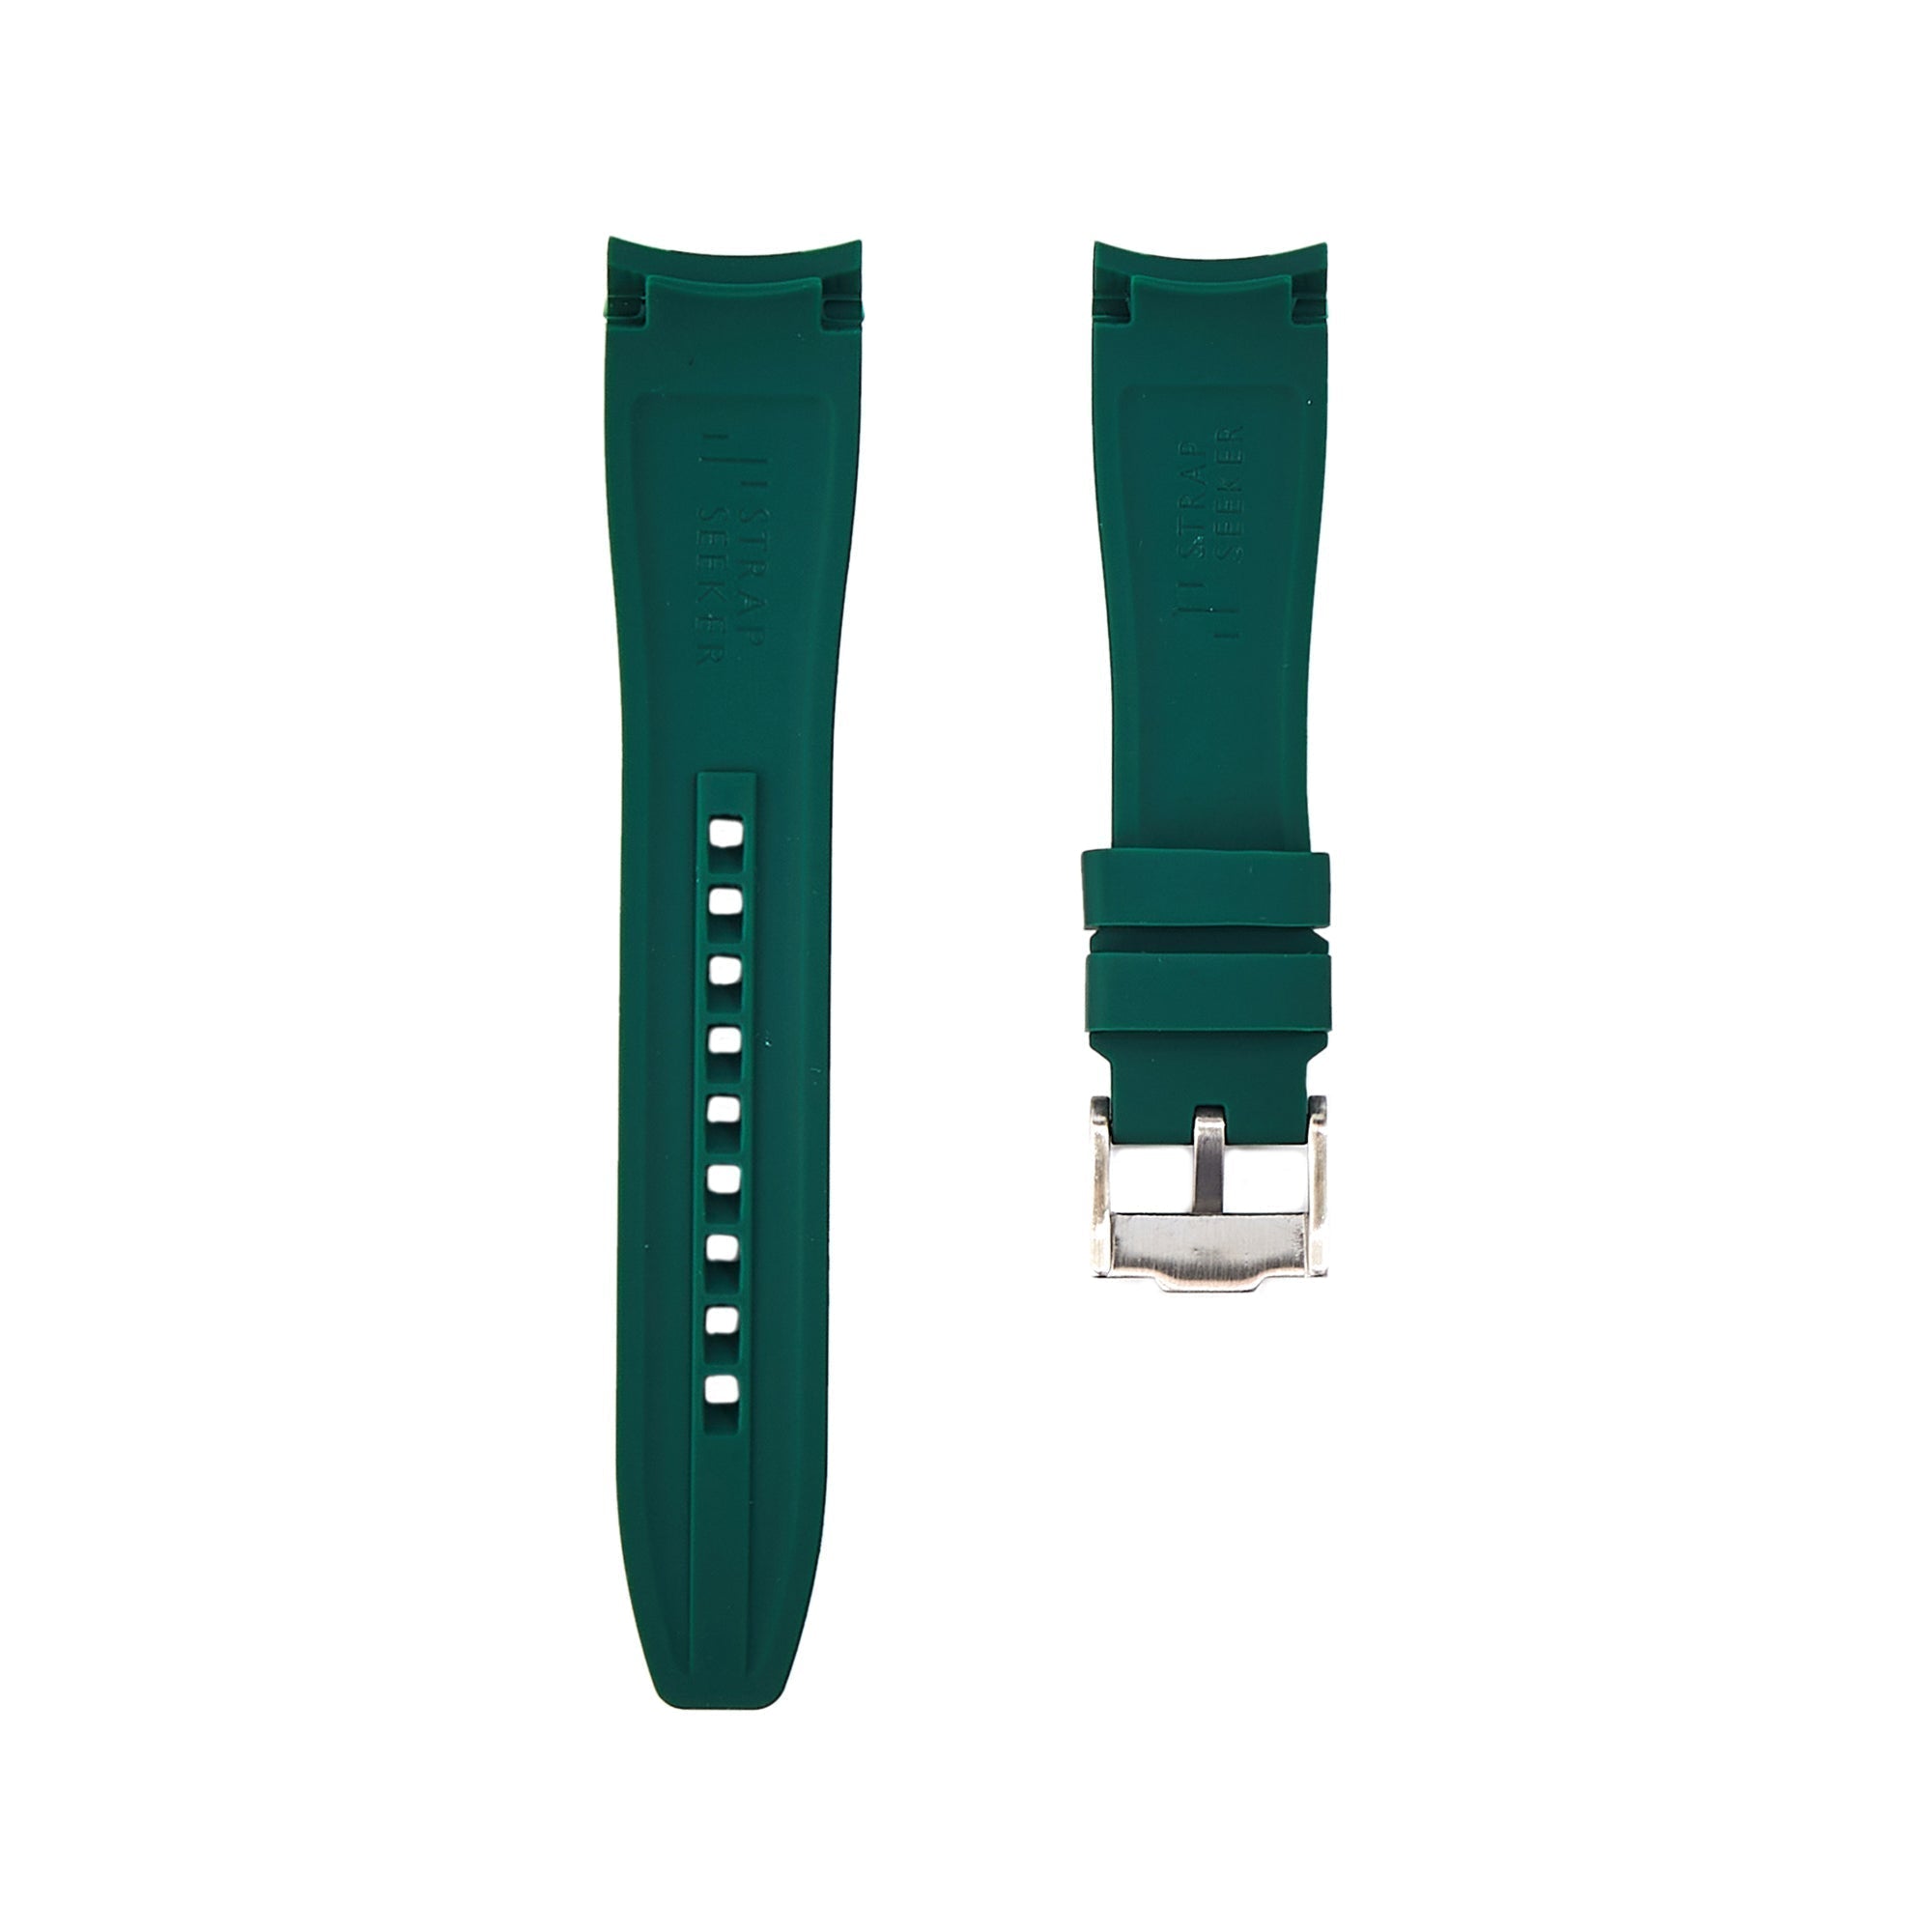 Curved End Soft Silicone Strap - Compatible with Orient Kamasu - Dark Green (2418) -StrapSeeker